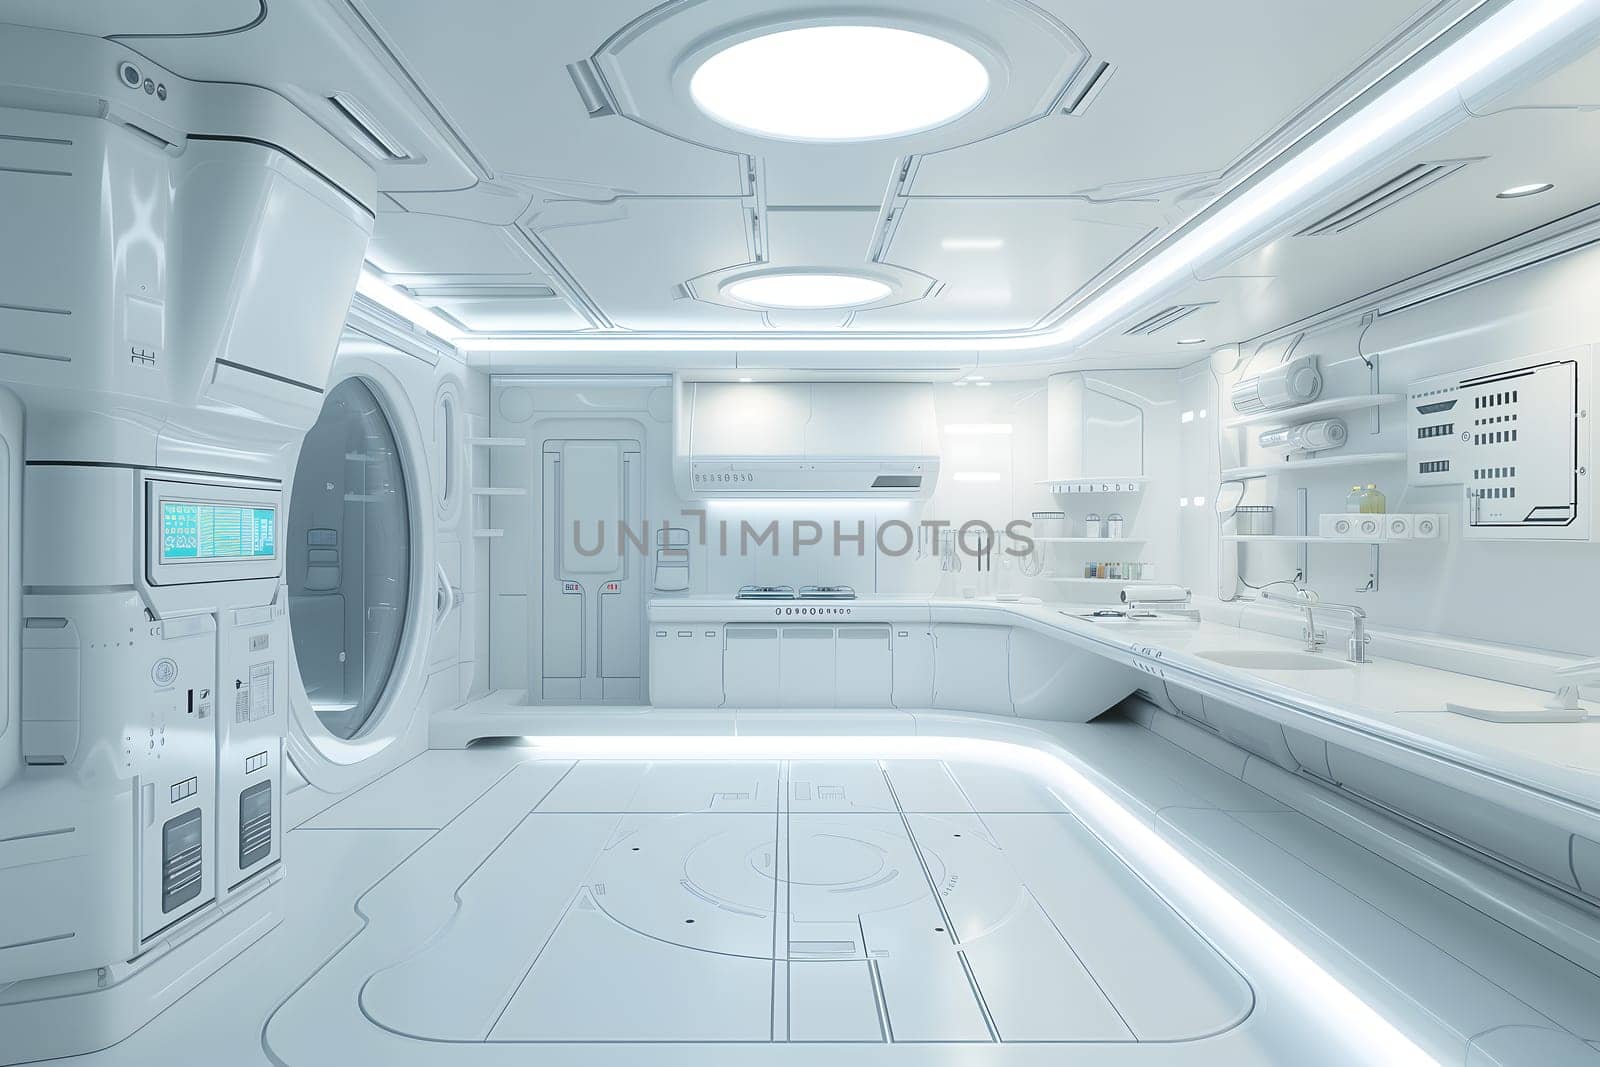 futuristic clean white space station style interior of kitchen room. Neural network generated image. Not based on any actual scene or pattern.